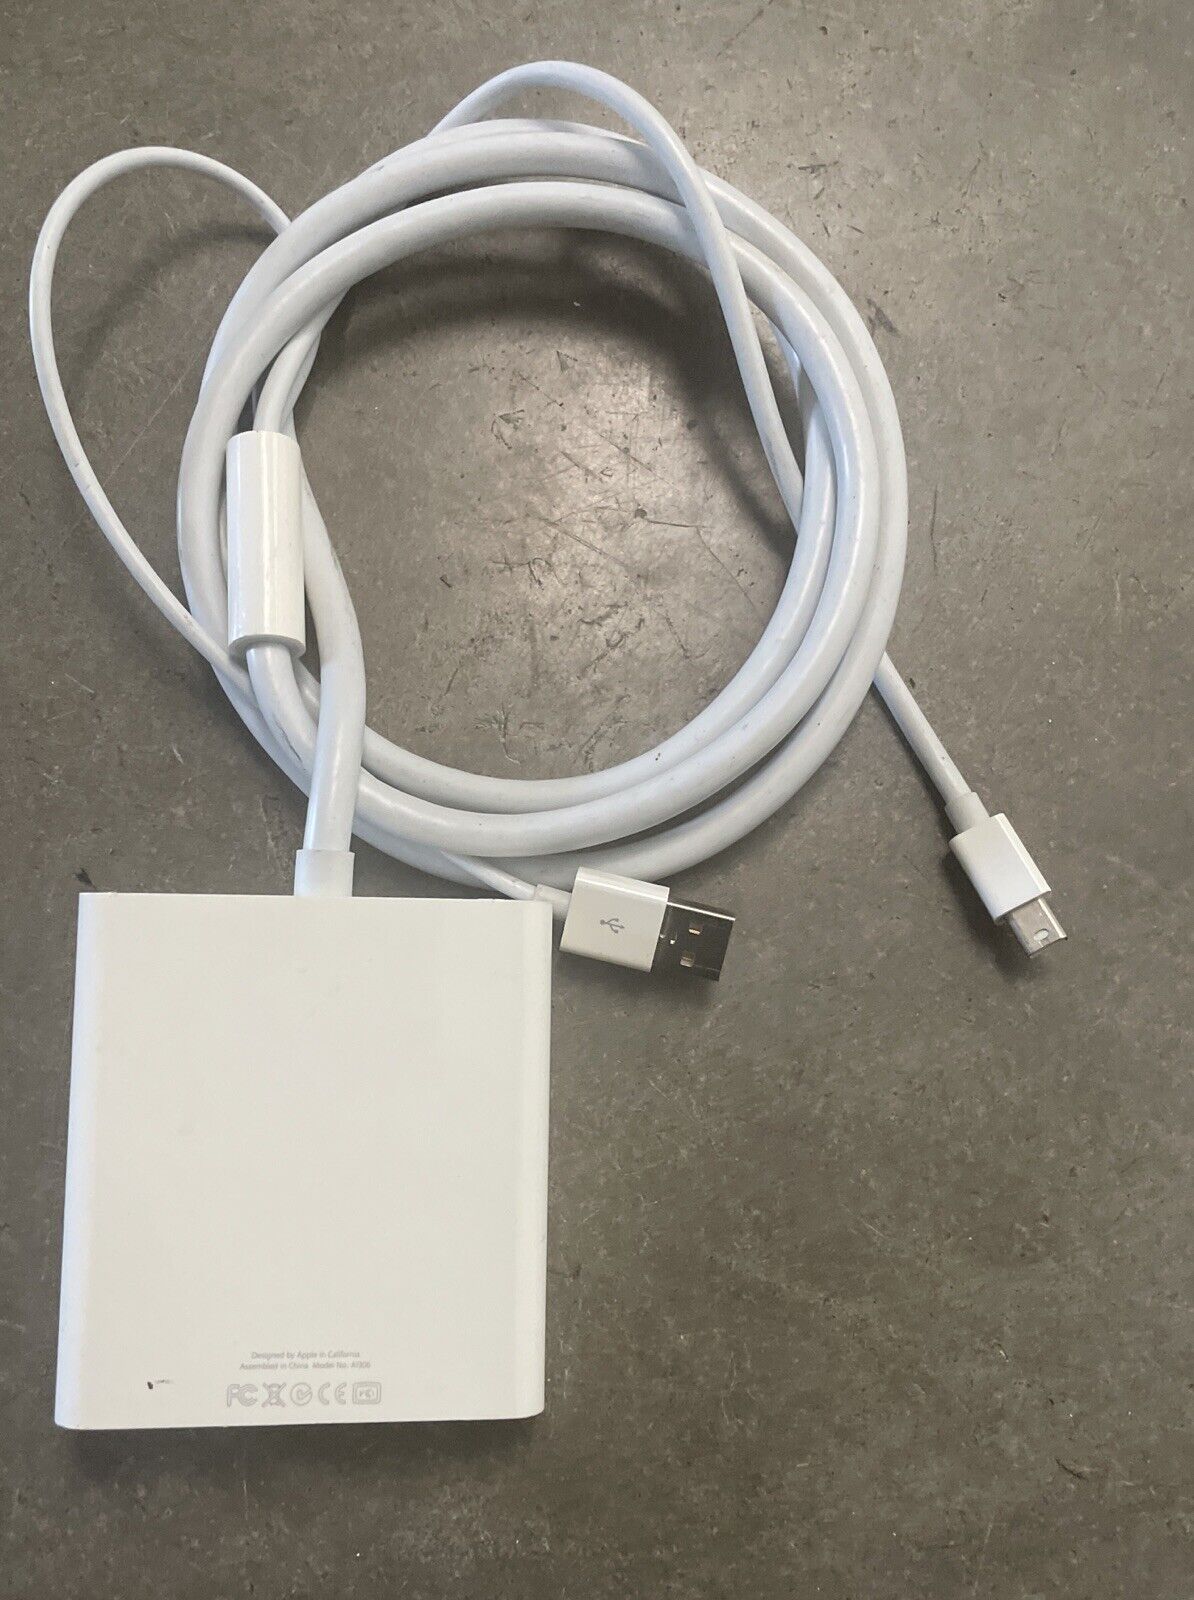 Apple A1306 Mini DisplayPort to Dual-Link DVI Adapter connector cable